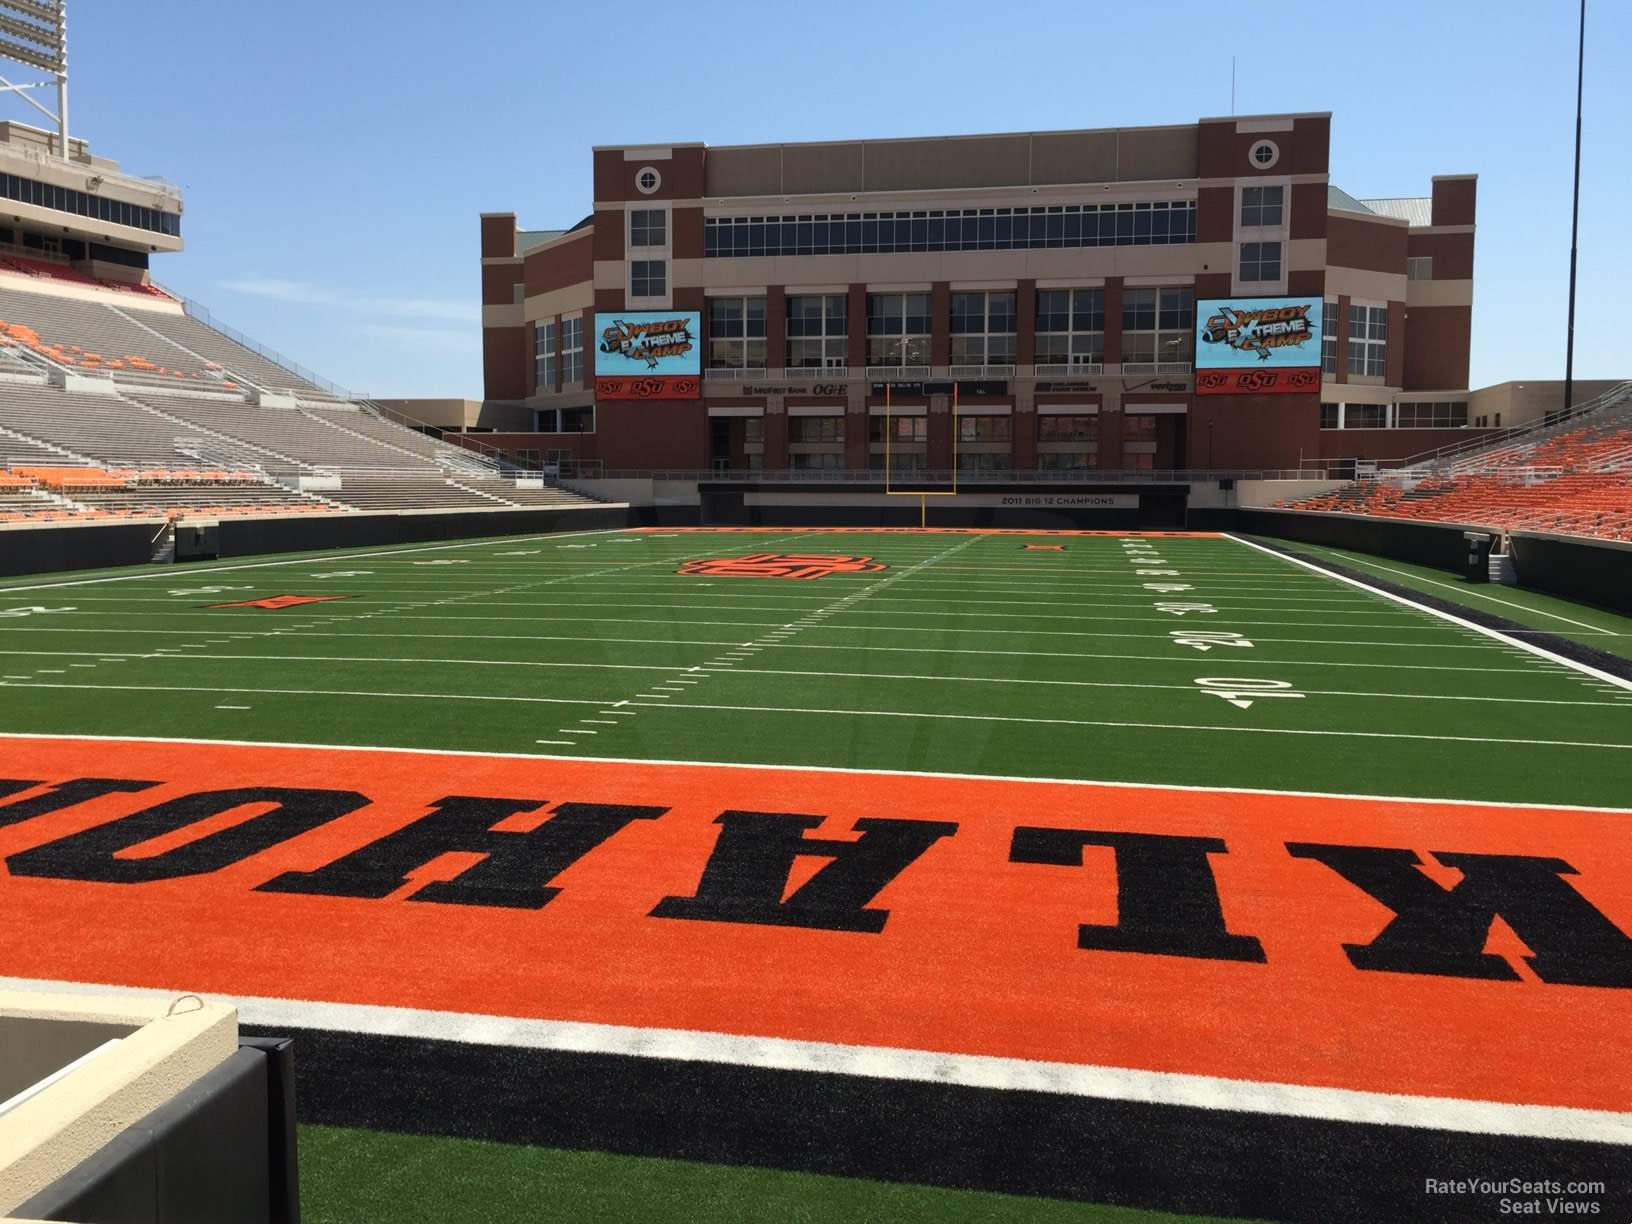 section 110, row 4 seat view  - boone pickens stadium